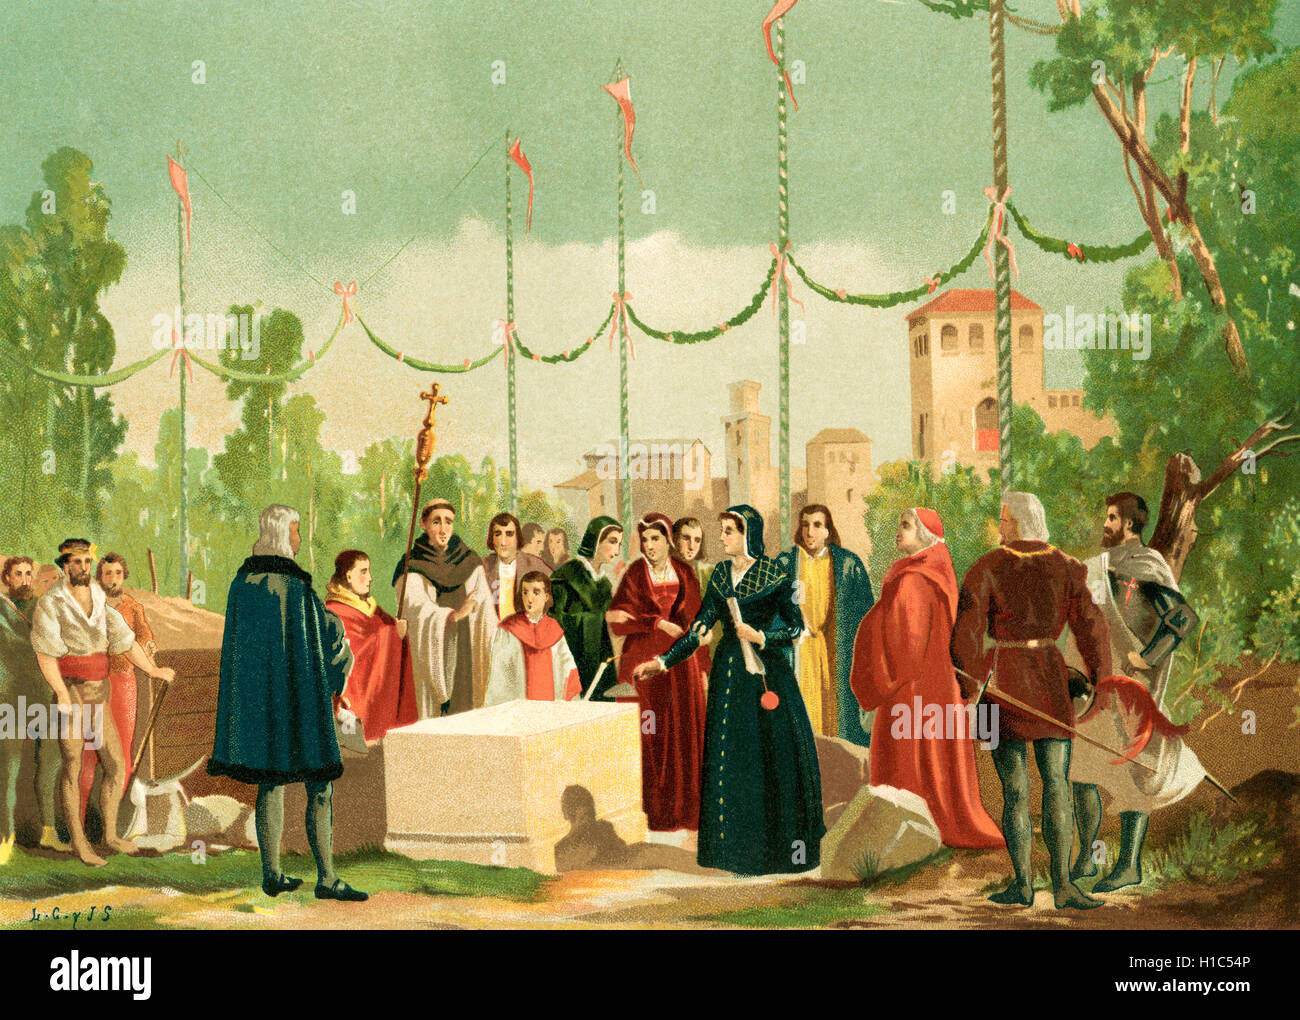 The founding of El Hospital de la Concepción de Nuestra Señora, aka Hospital de la Latina or Hospital de la Concepción, Madrid, Spain by Francisco Ramírez “el Artillero” and his wife Beatriz Galindo de Vera 'La Latina' in 1499.  Francisco Ramírez de Madrid, died 1501.  Spanish artillery officer, counselor of the Catholic Monarchs and Secretary of King Ferdinand II of Aragon.  Beatriz Galindo, La Latina, sometimes spelled Beatrix, c.1465 - 1534.   Spanish Latinist, educator, writer, humanist and a teacher of Queen Isabella of Castile and her children. Stock Photo